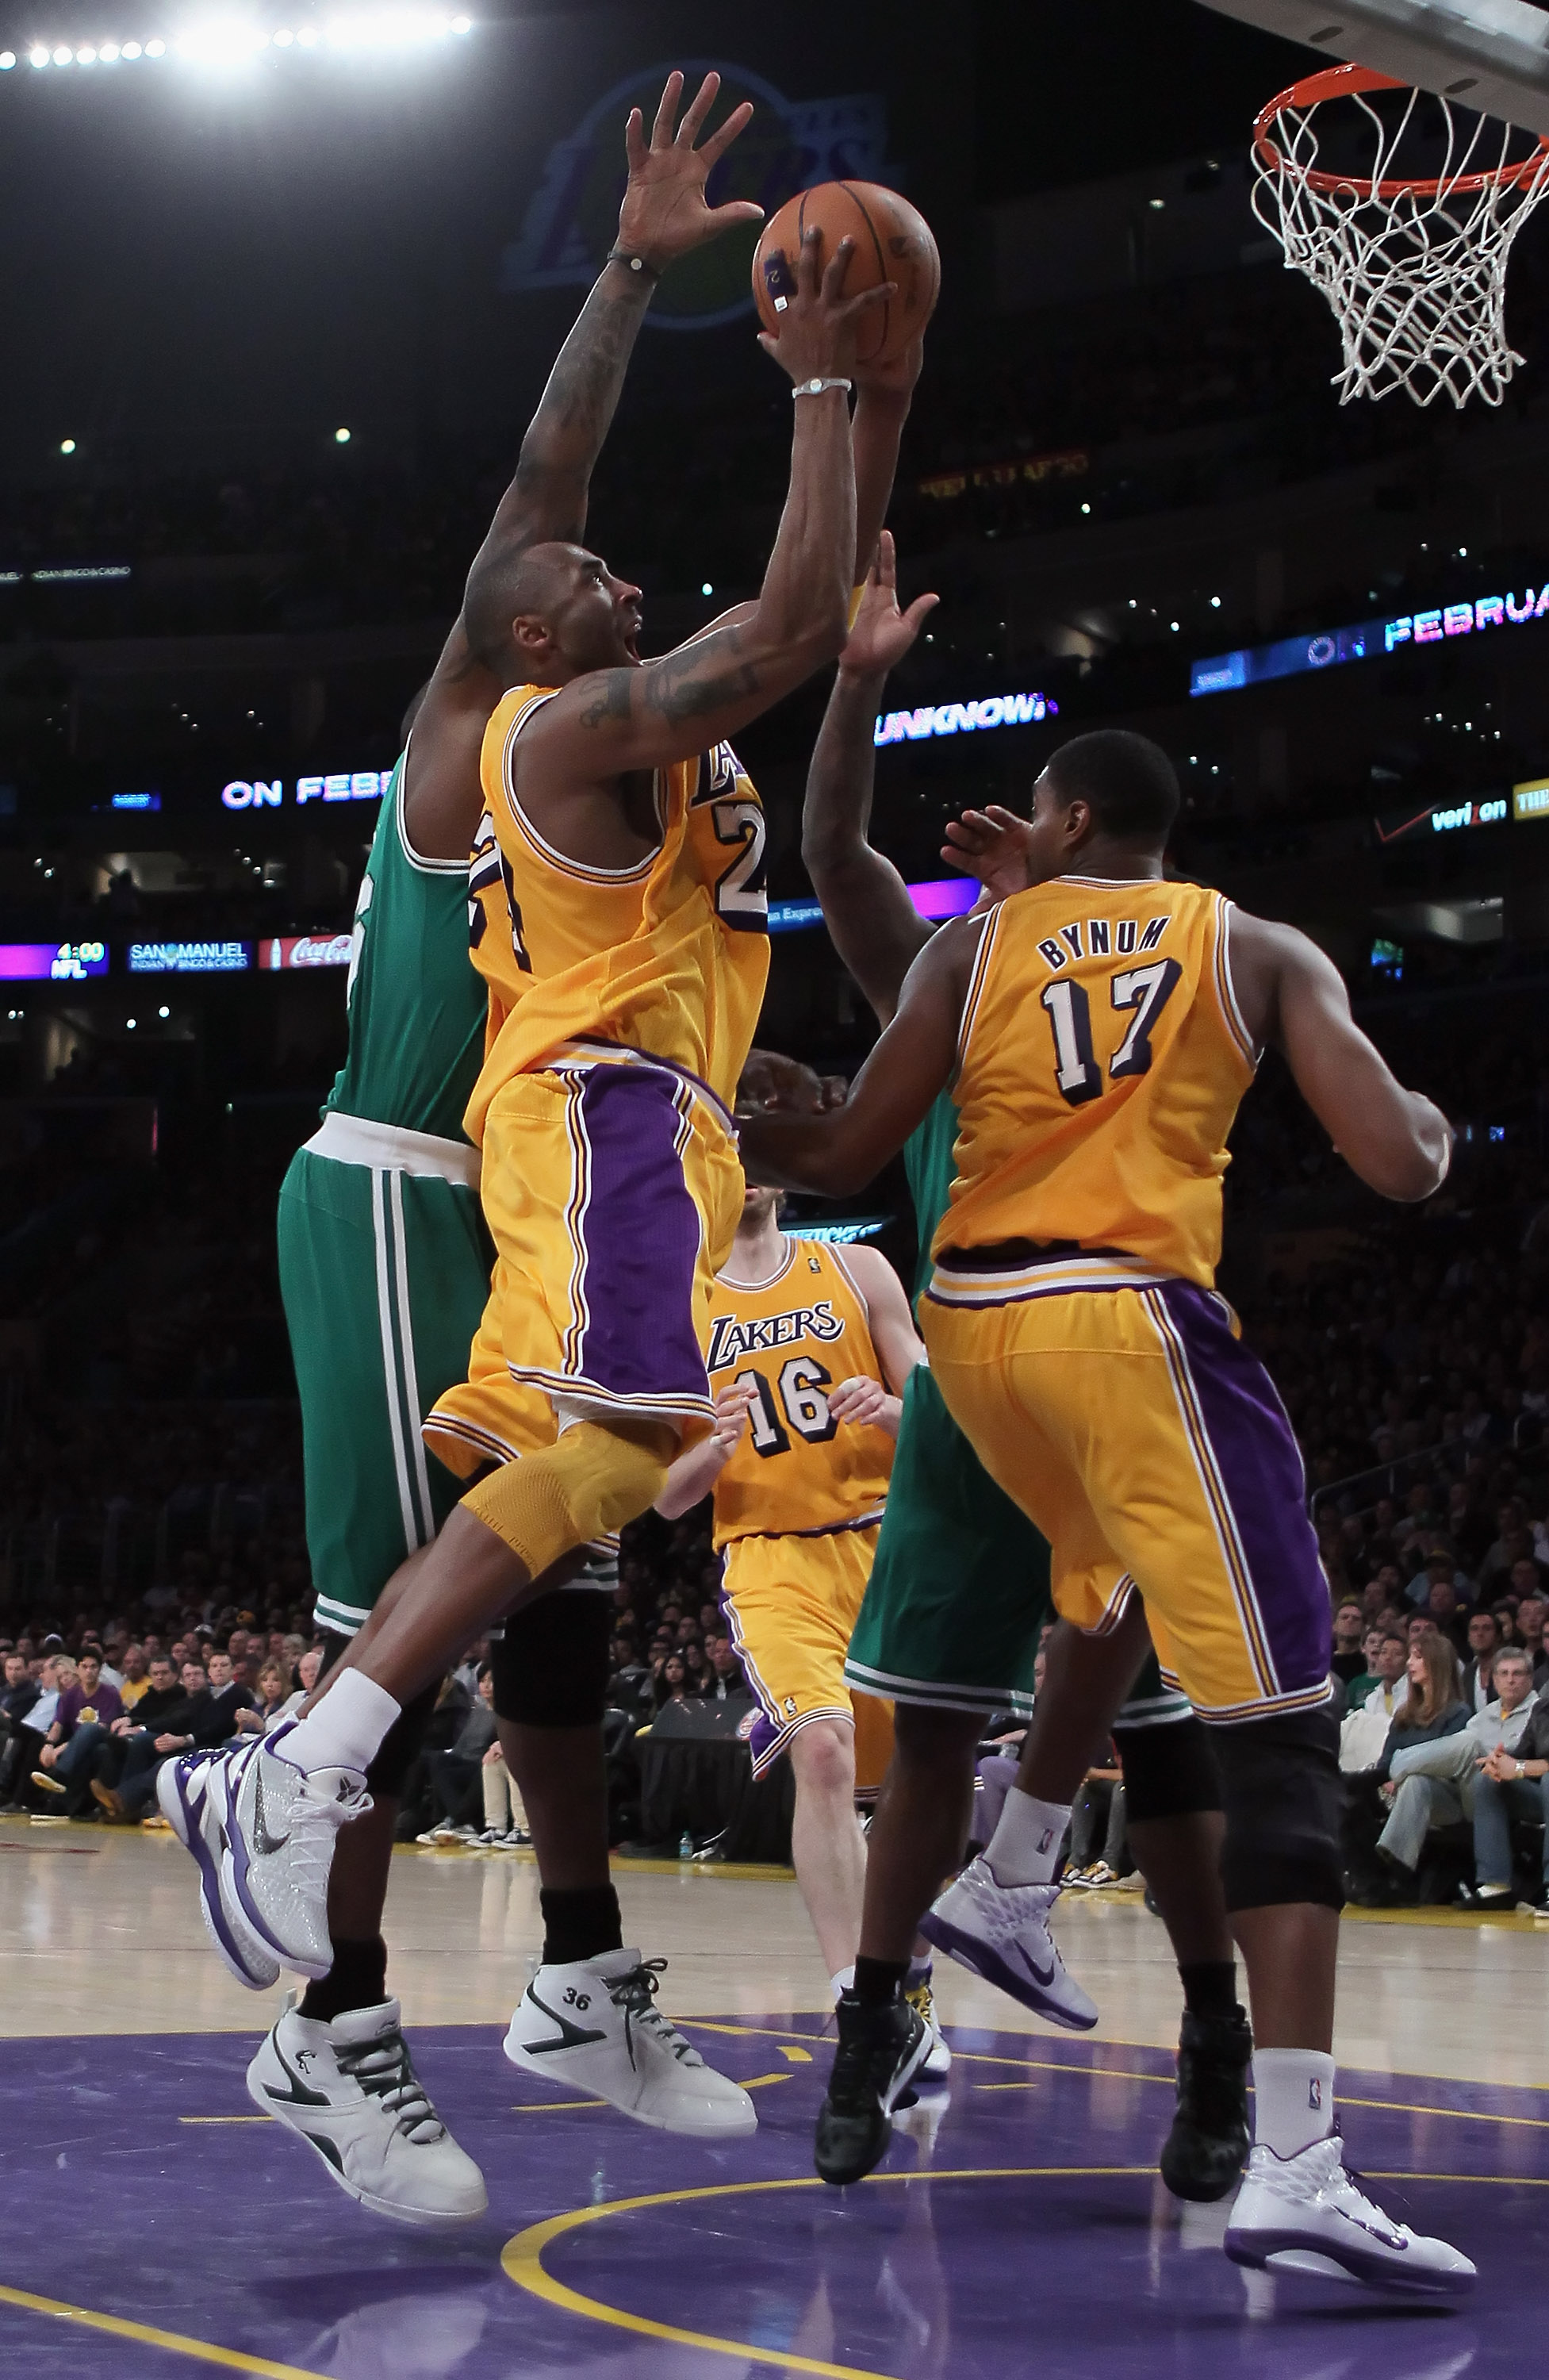 LOS ANGELES, CA - JANUARY 30:  Kobe Bryant #24 of the Los Angeles Lakers drives to the basket over teammate Andrew Bynum #17 against the Boston Celtics in the second half at Staples Center on January 30, 2011 in Los Angeles, California. The Celtics defeat